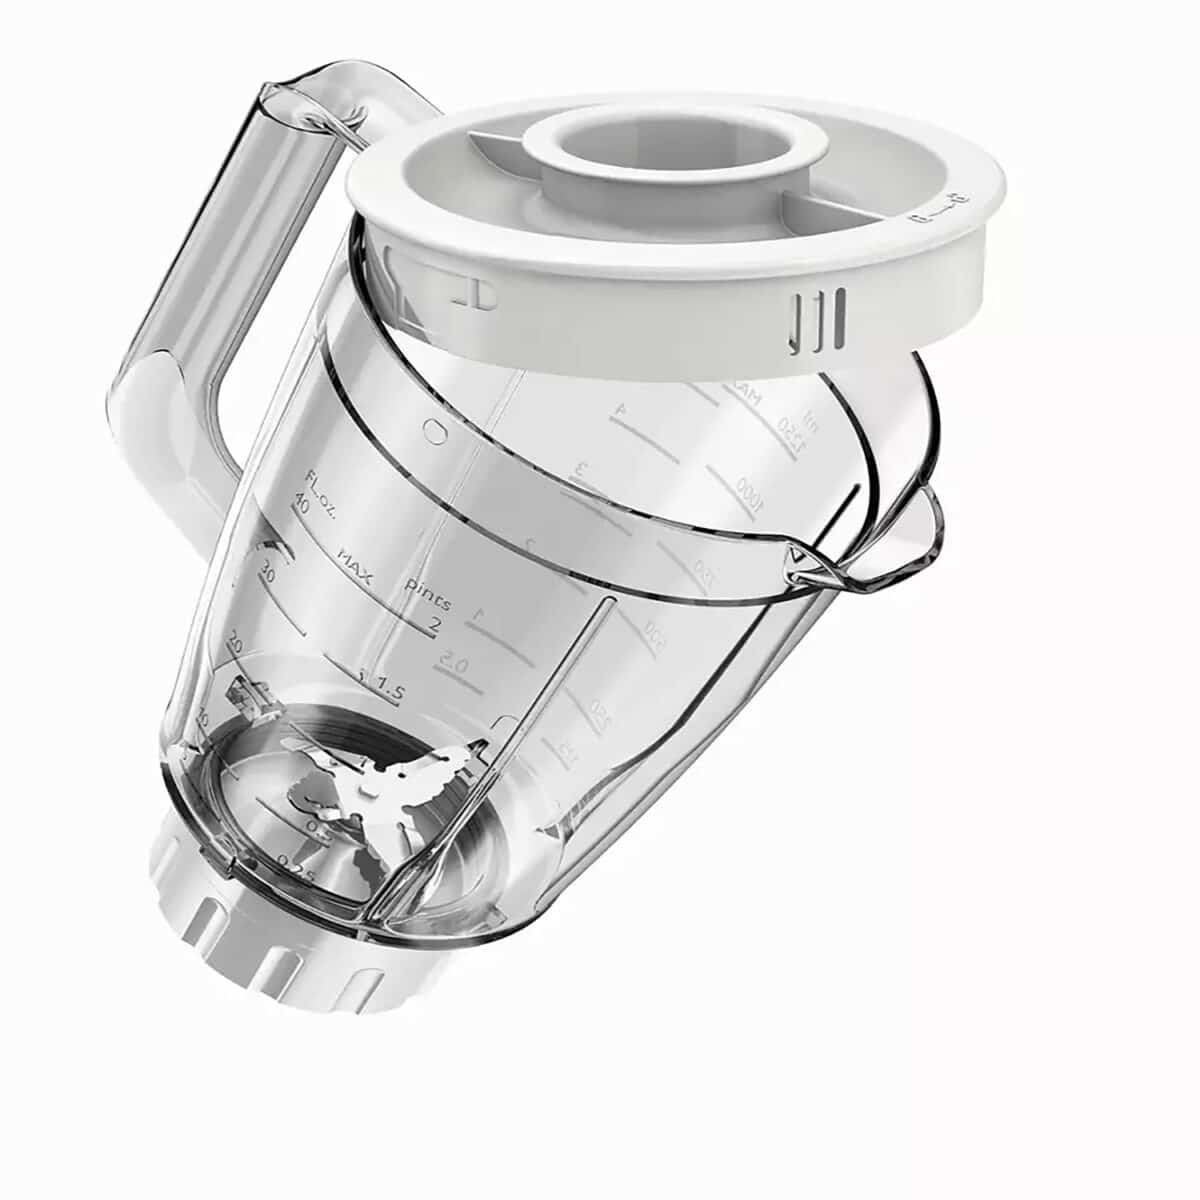 Philips 1.5L Daily Collection Blender (HR2114/05)